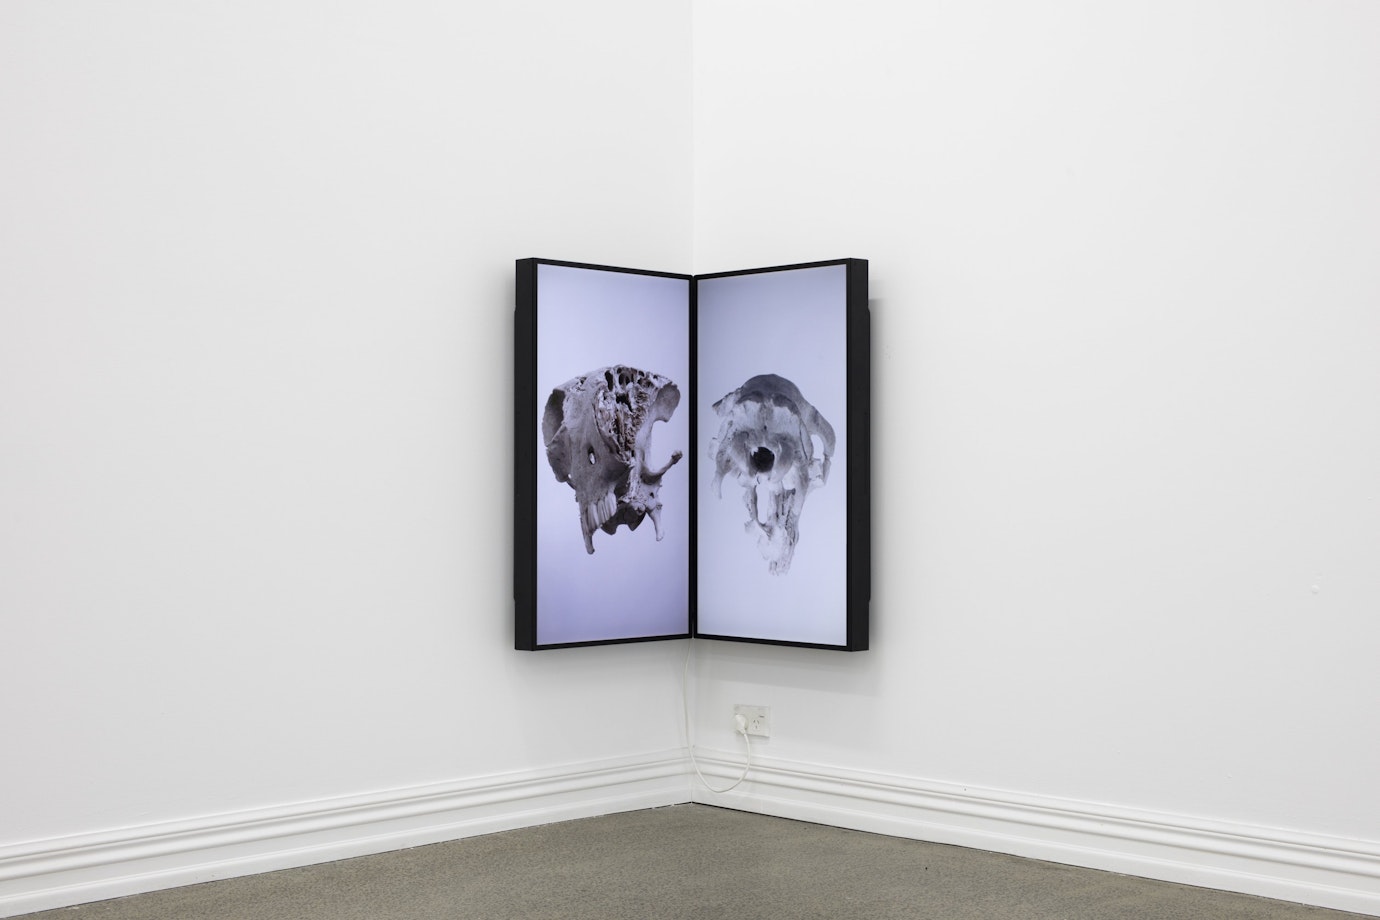 In the corner of a bare gallery two animal skulls are paired on matching LED screens